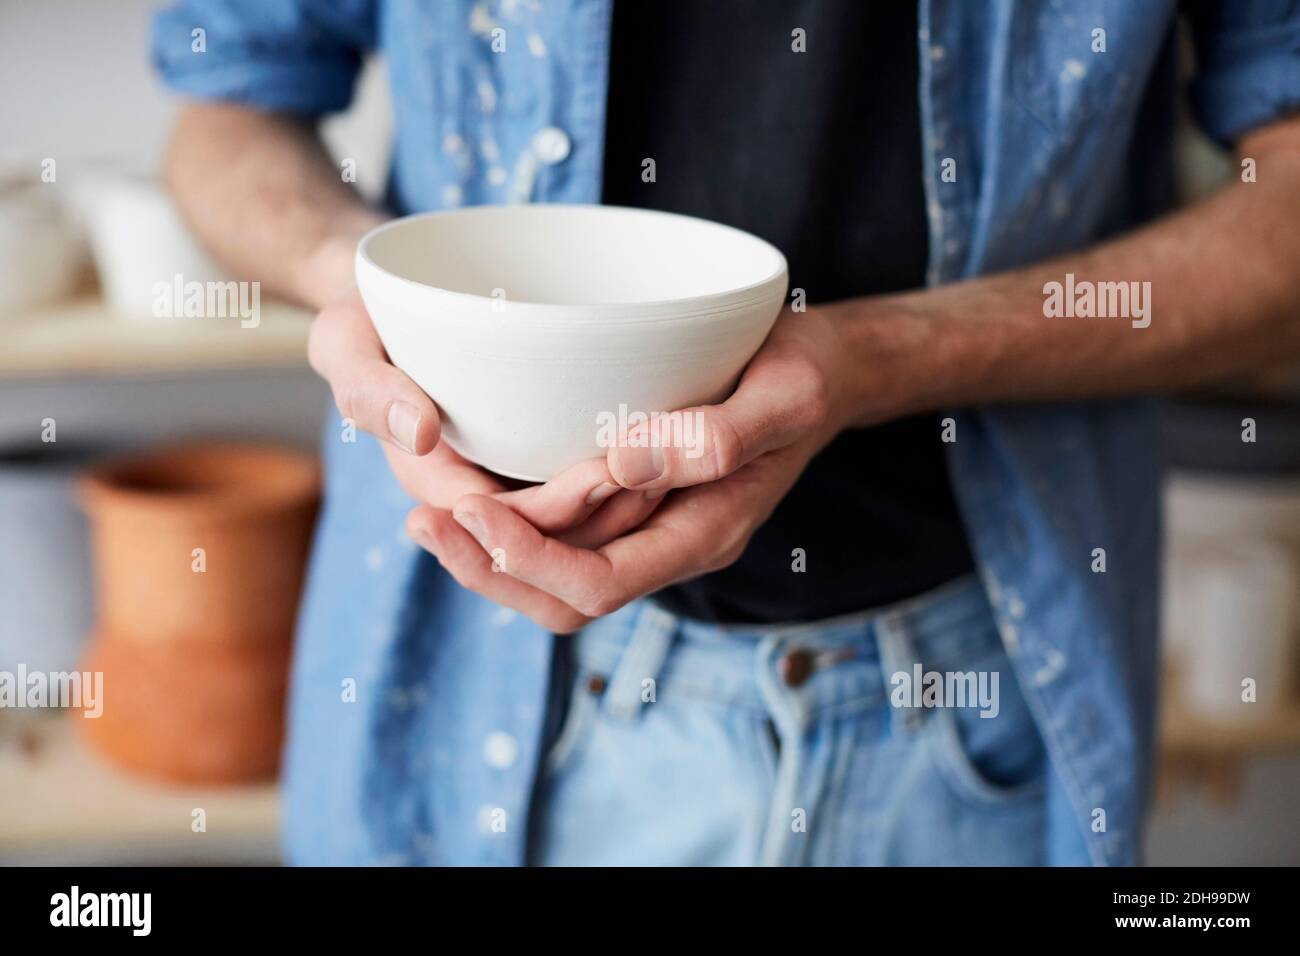 Midsection of man holding bowl in art studio Stock Photo